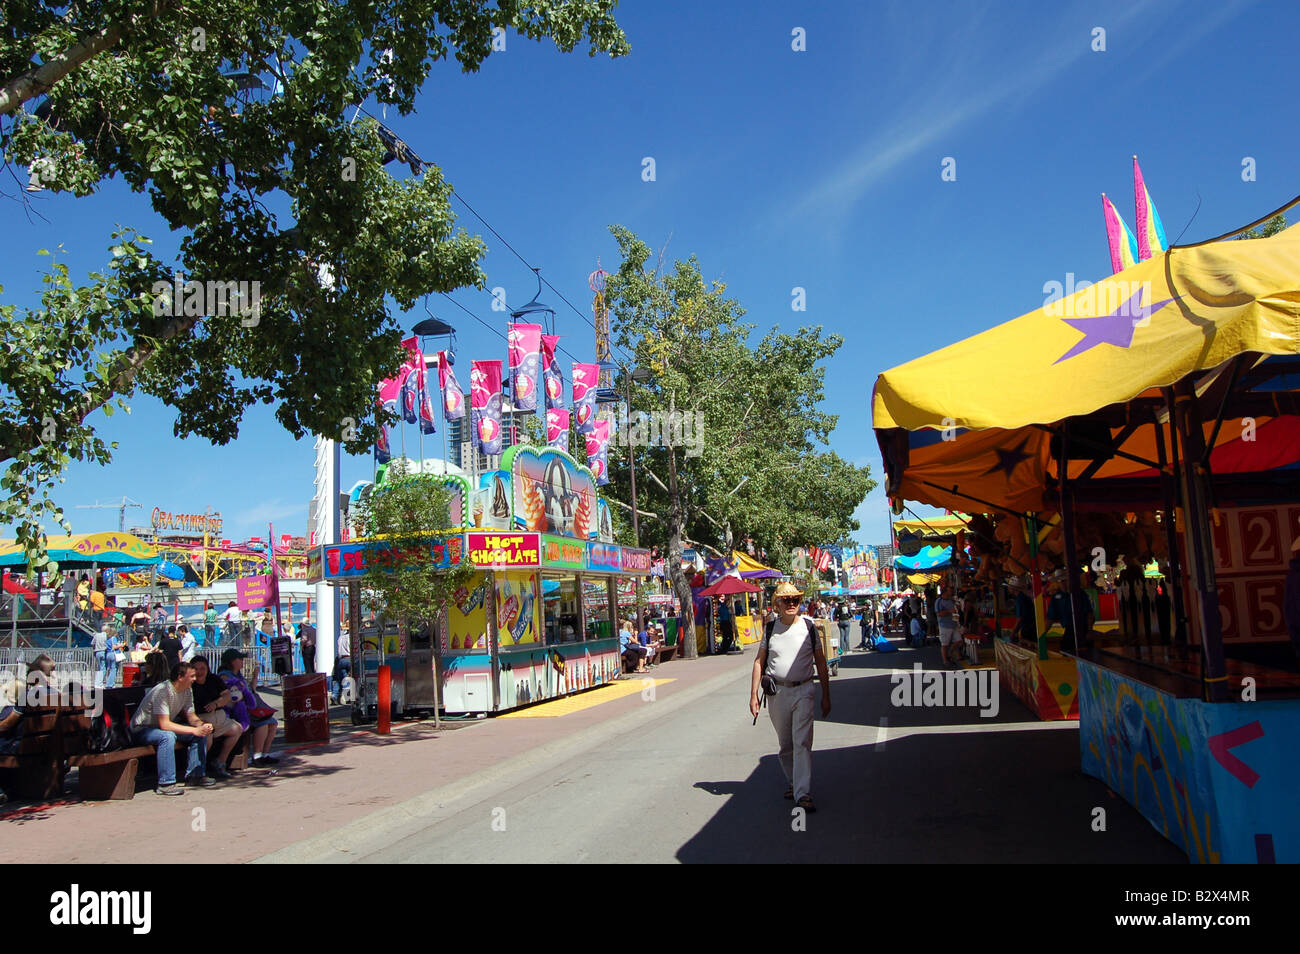 Attractions On Midway At Calgary Stampede Park Alberta Canada Stock Photo Alamy